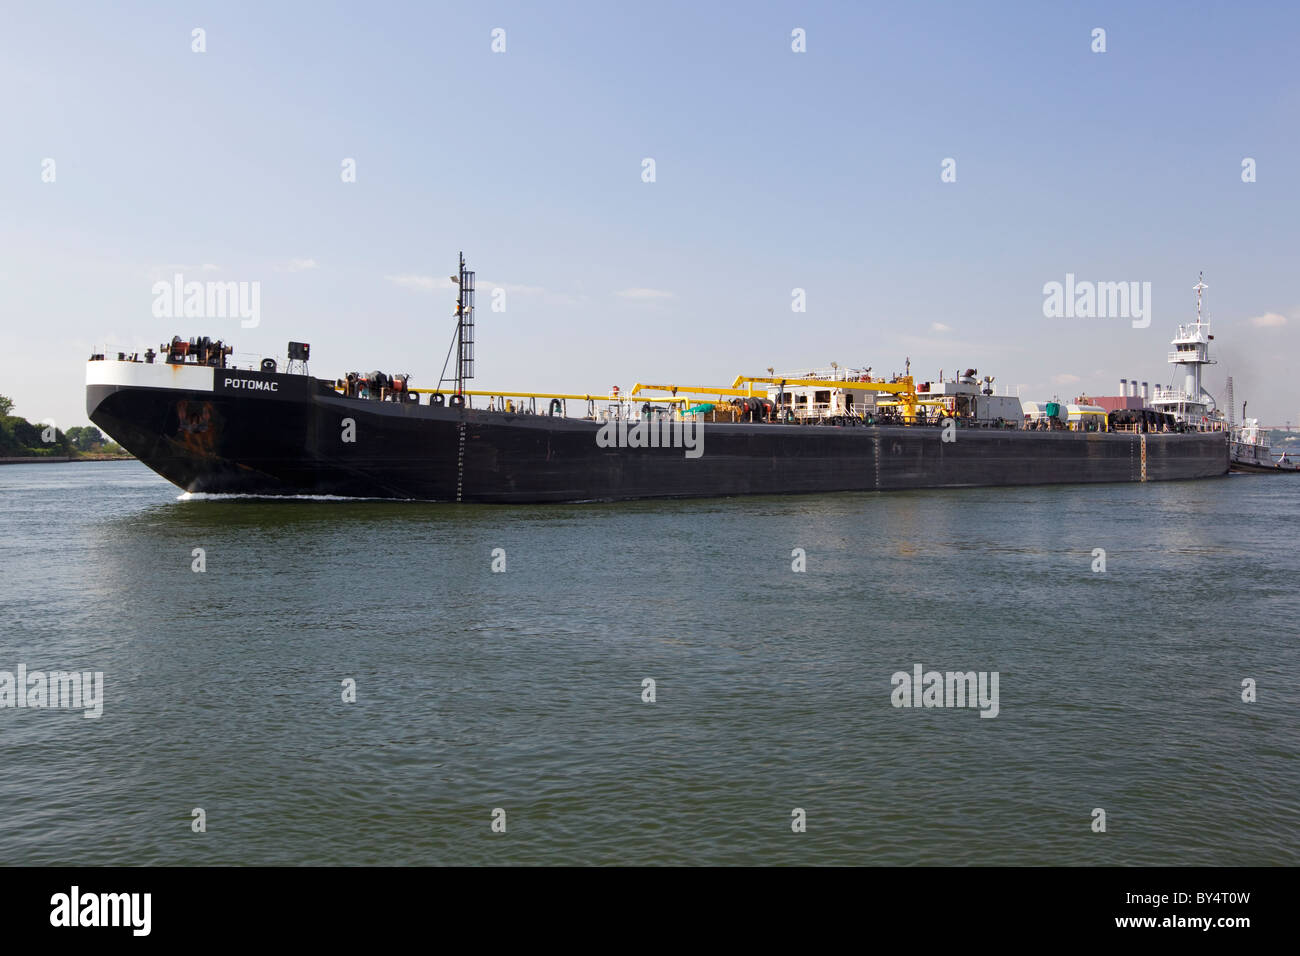 Freighter ship in harbor Stock Photo